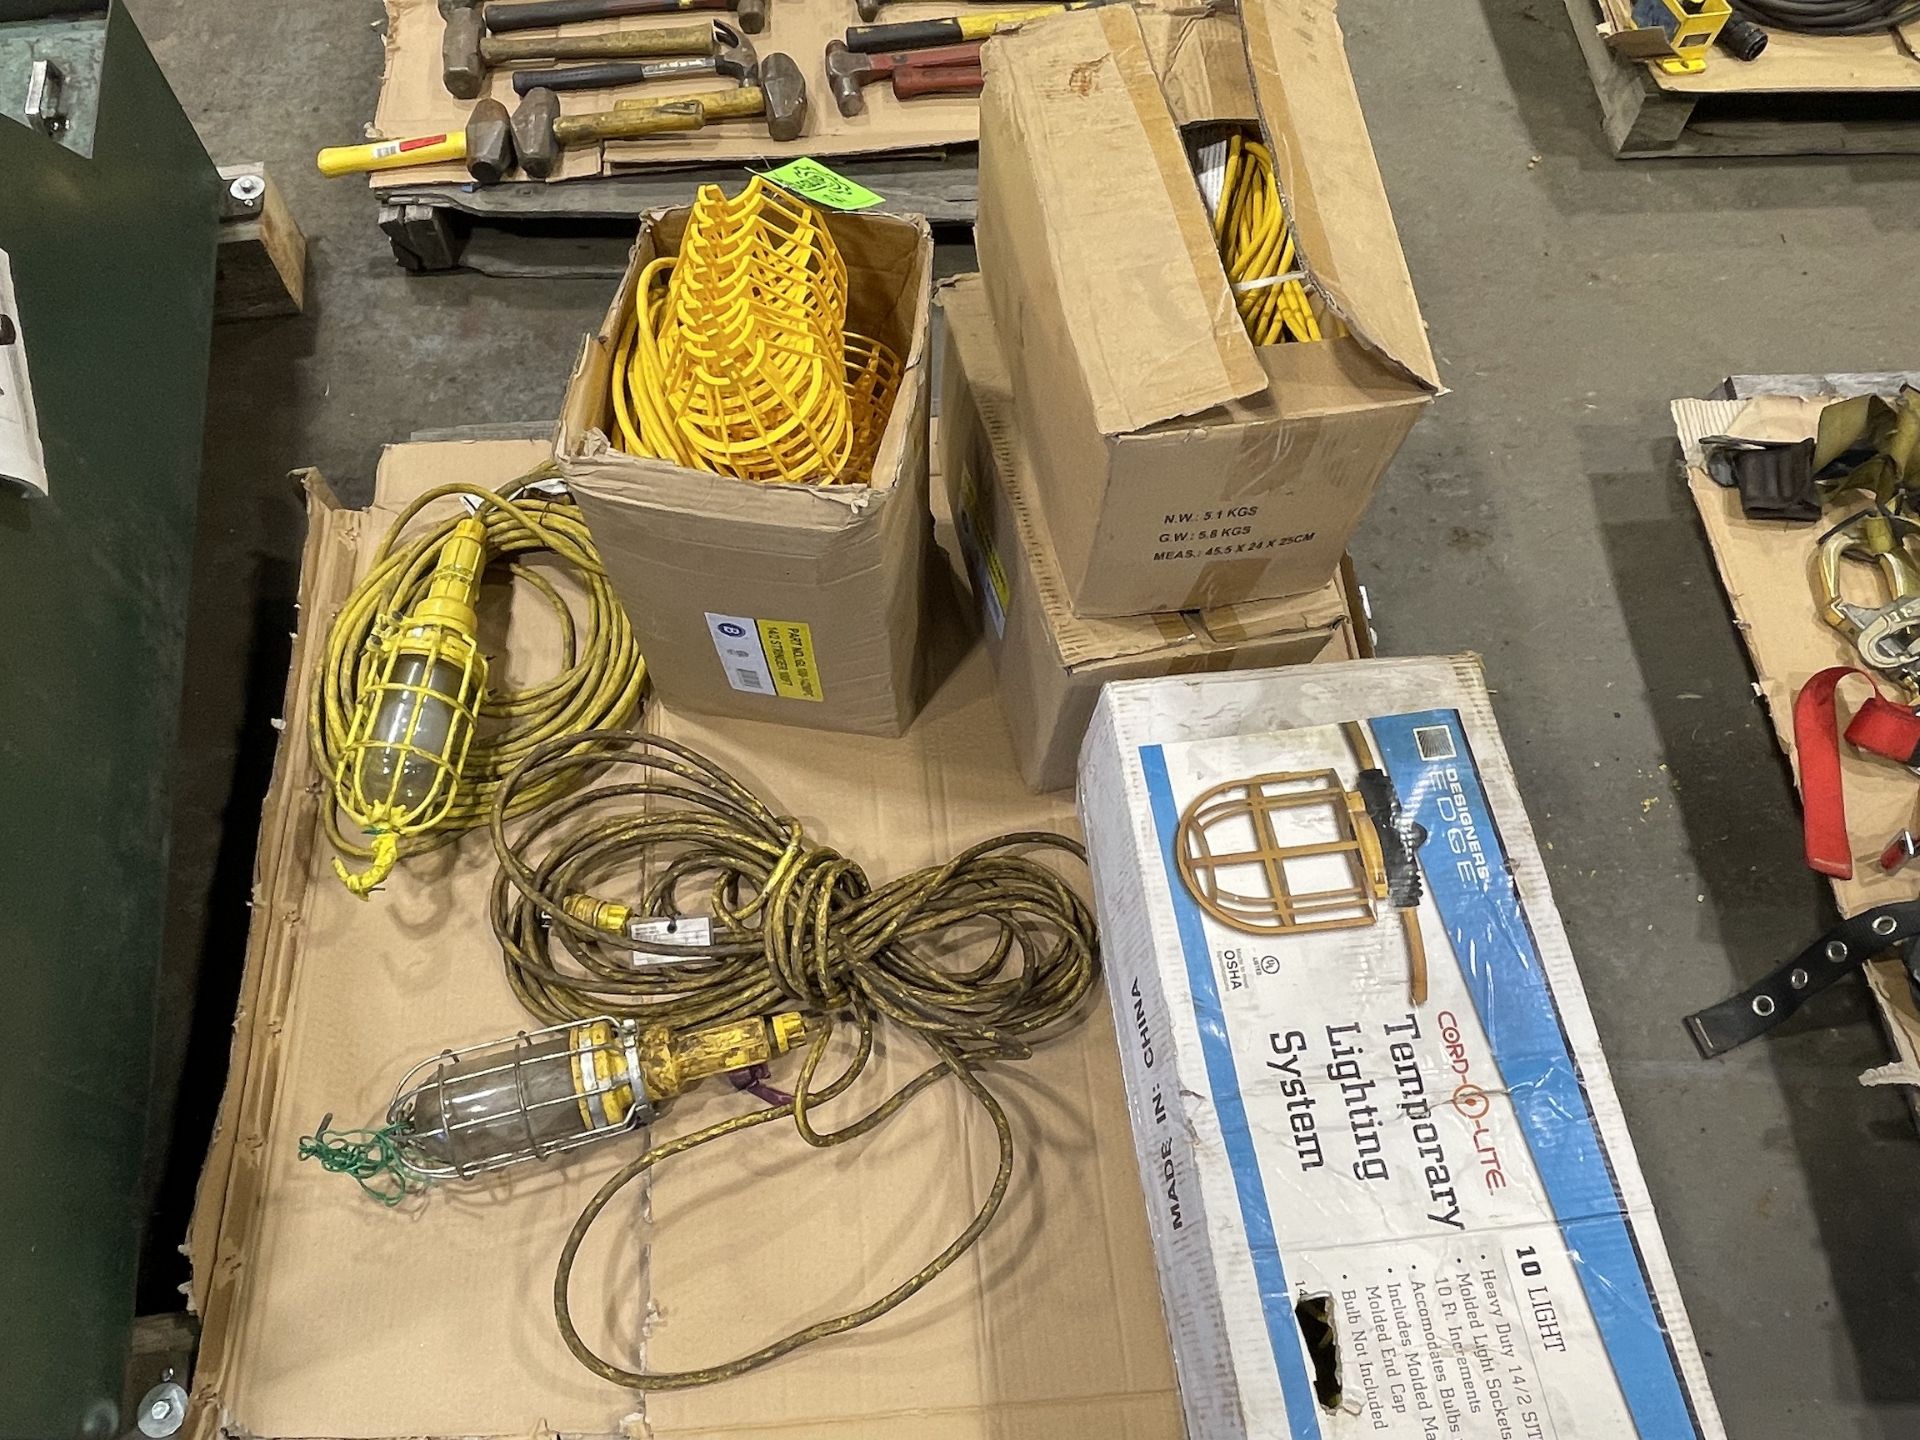 Lot of Temporary Lighting Systems - Upland